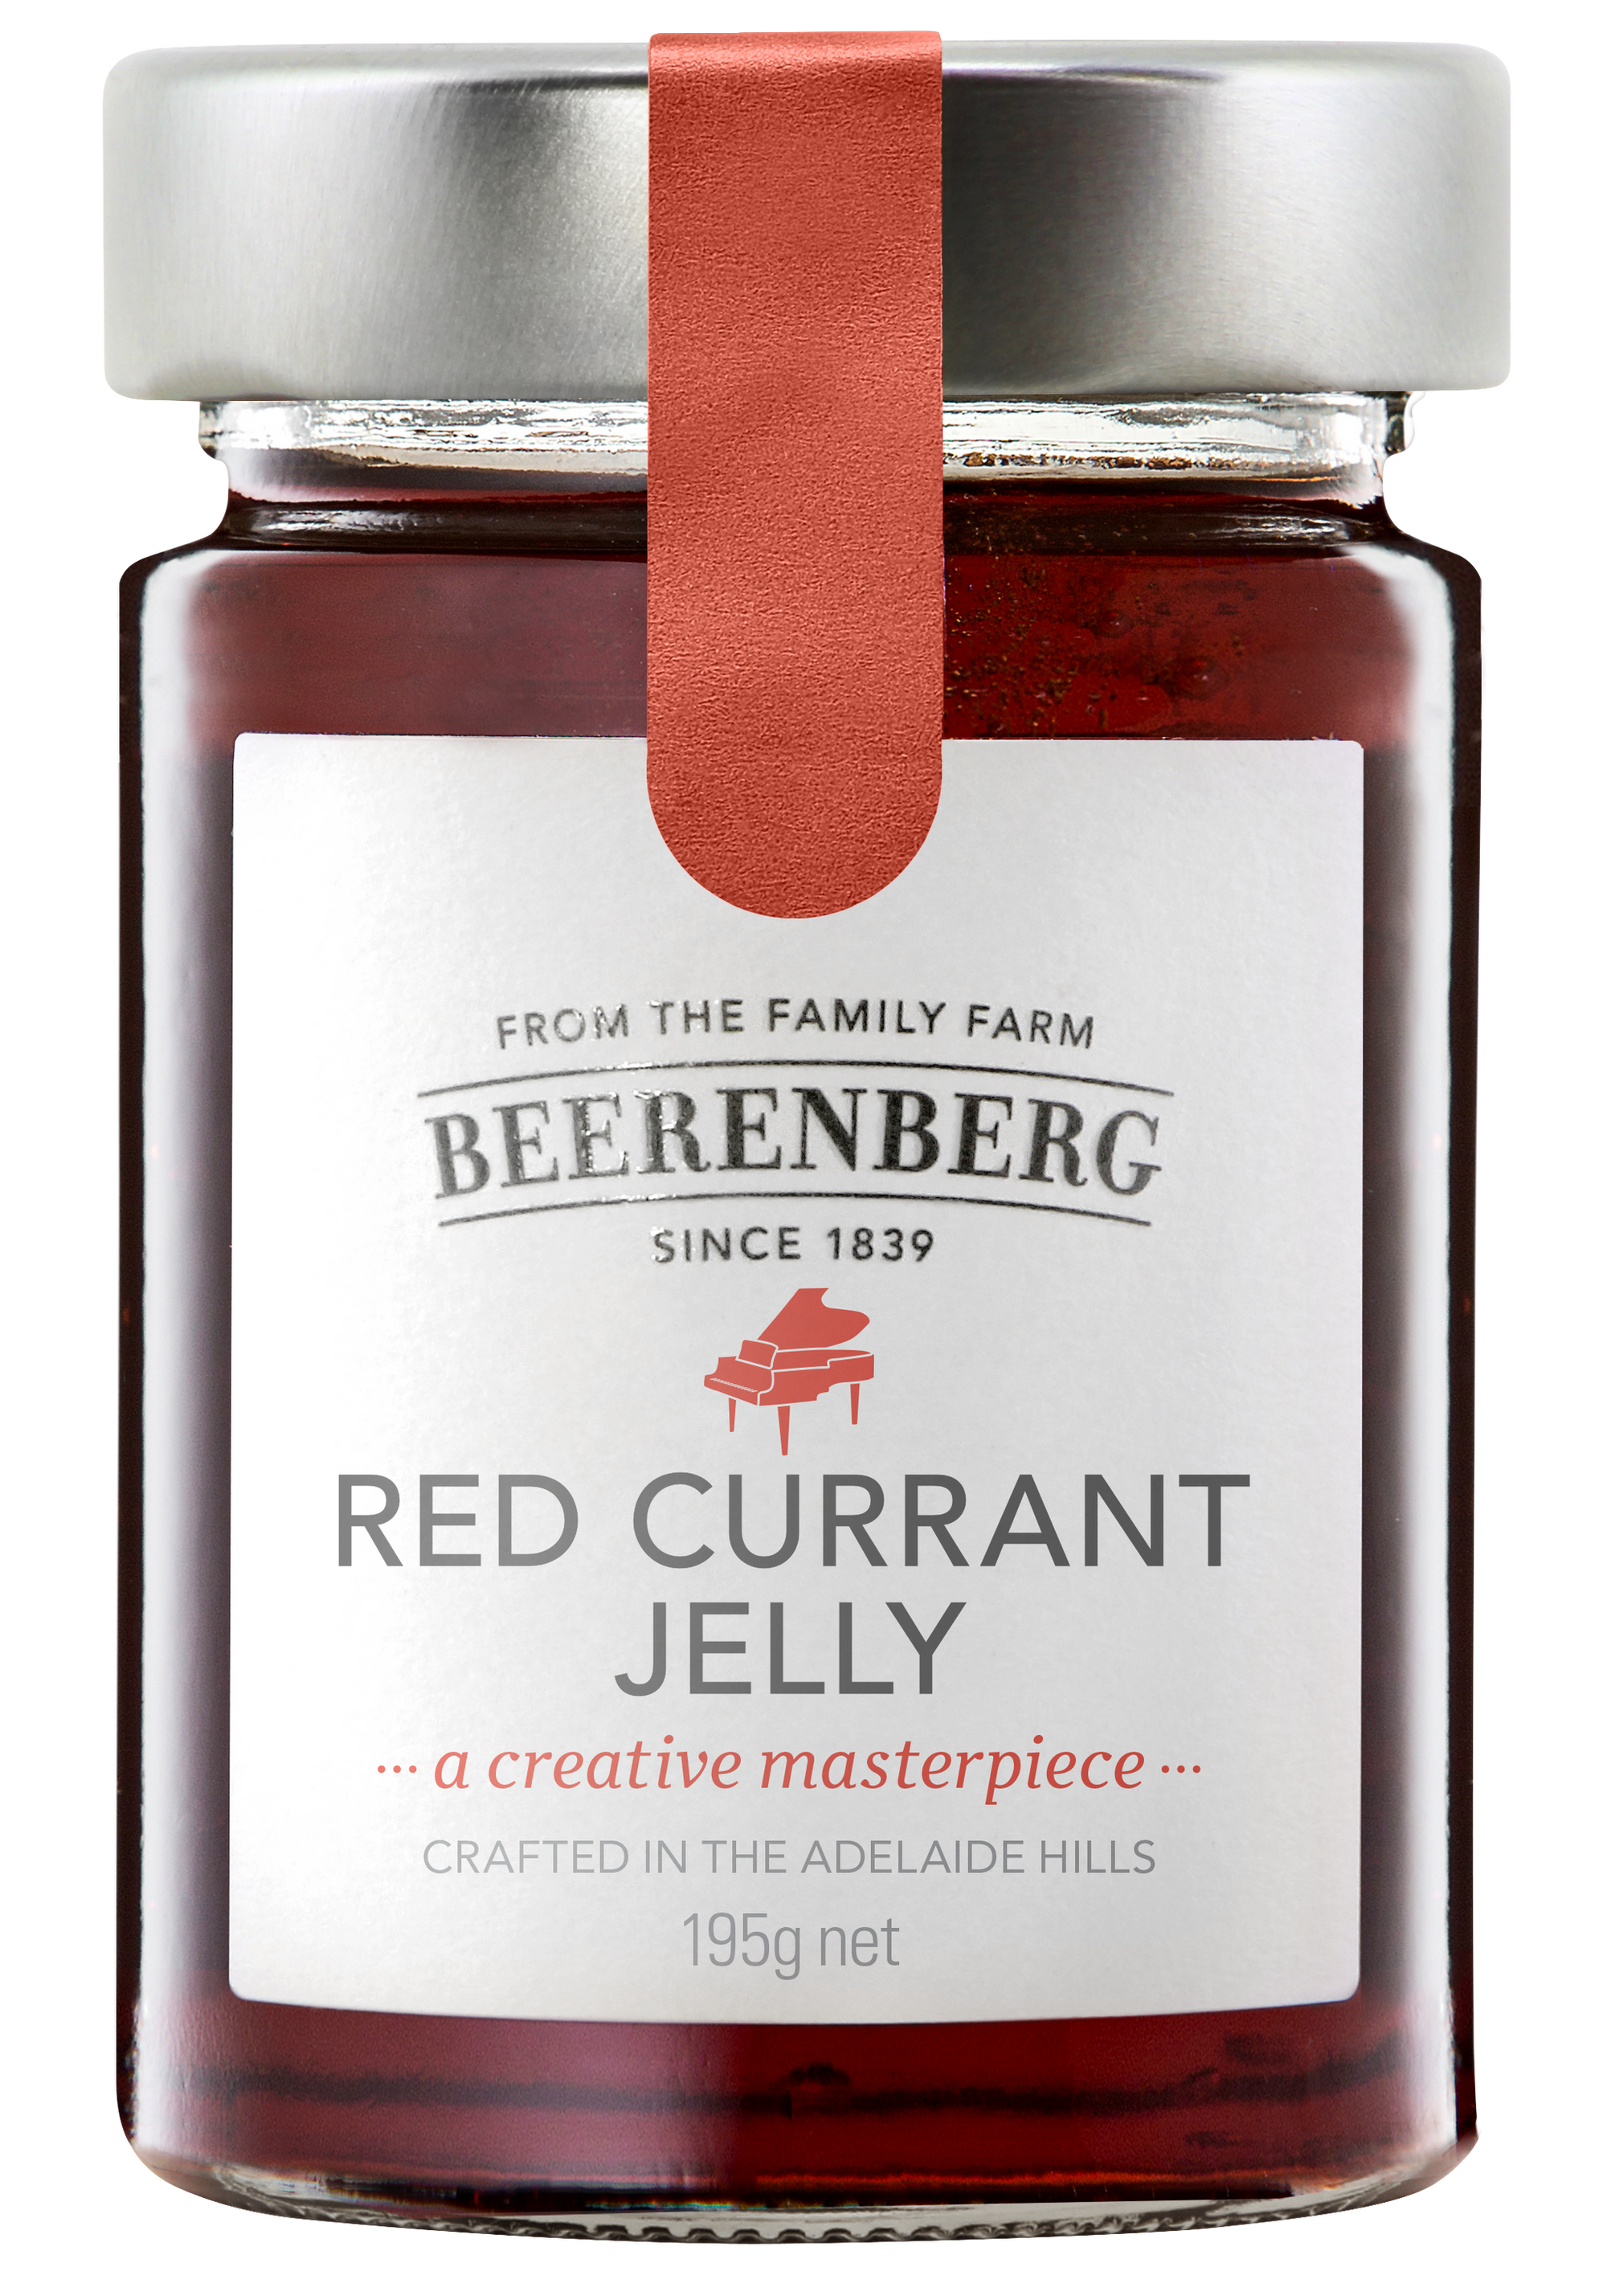 Beerenberg Red Currant Jelly 195g